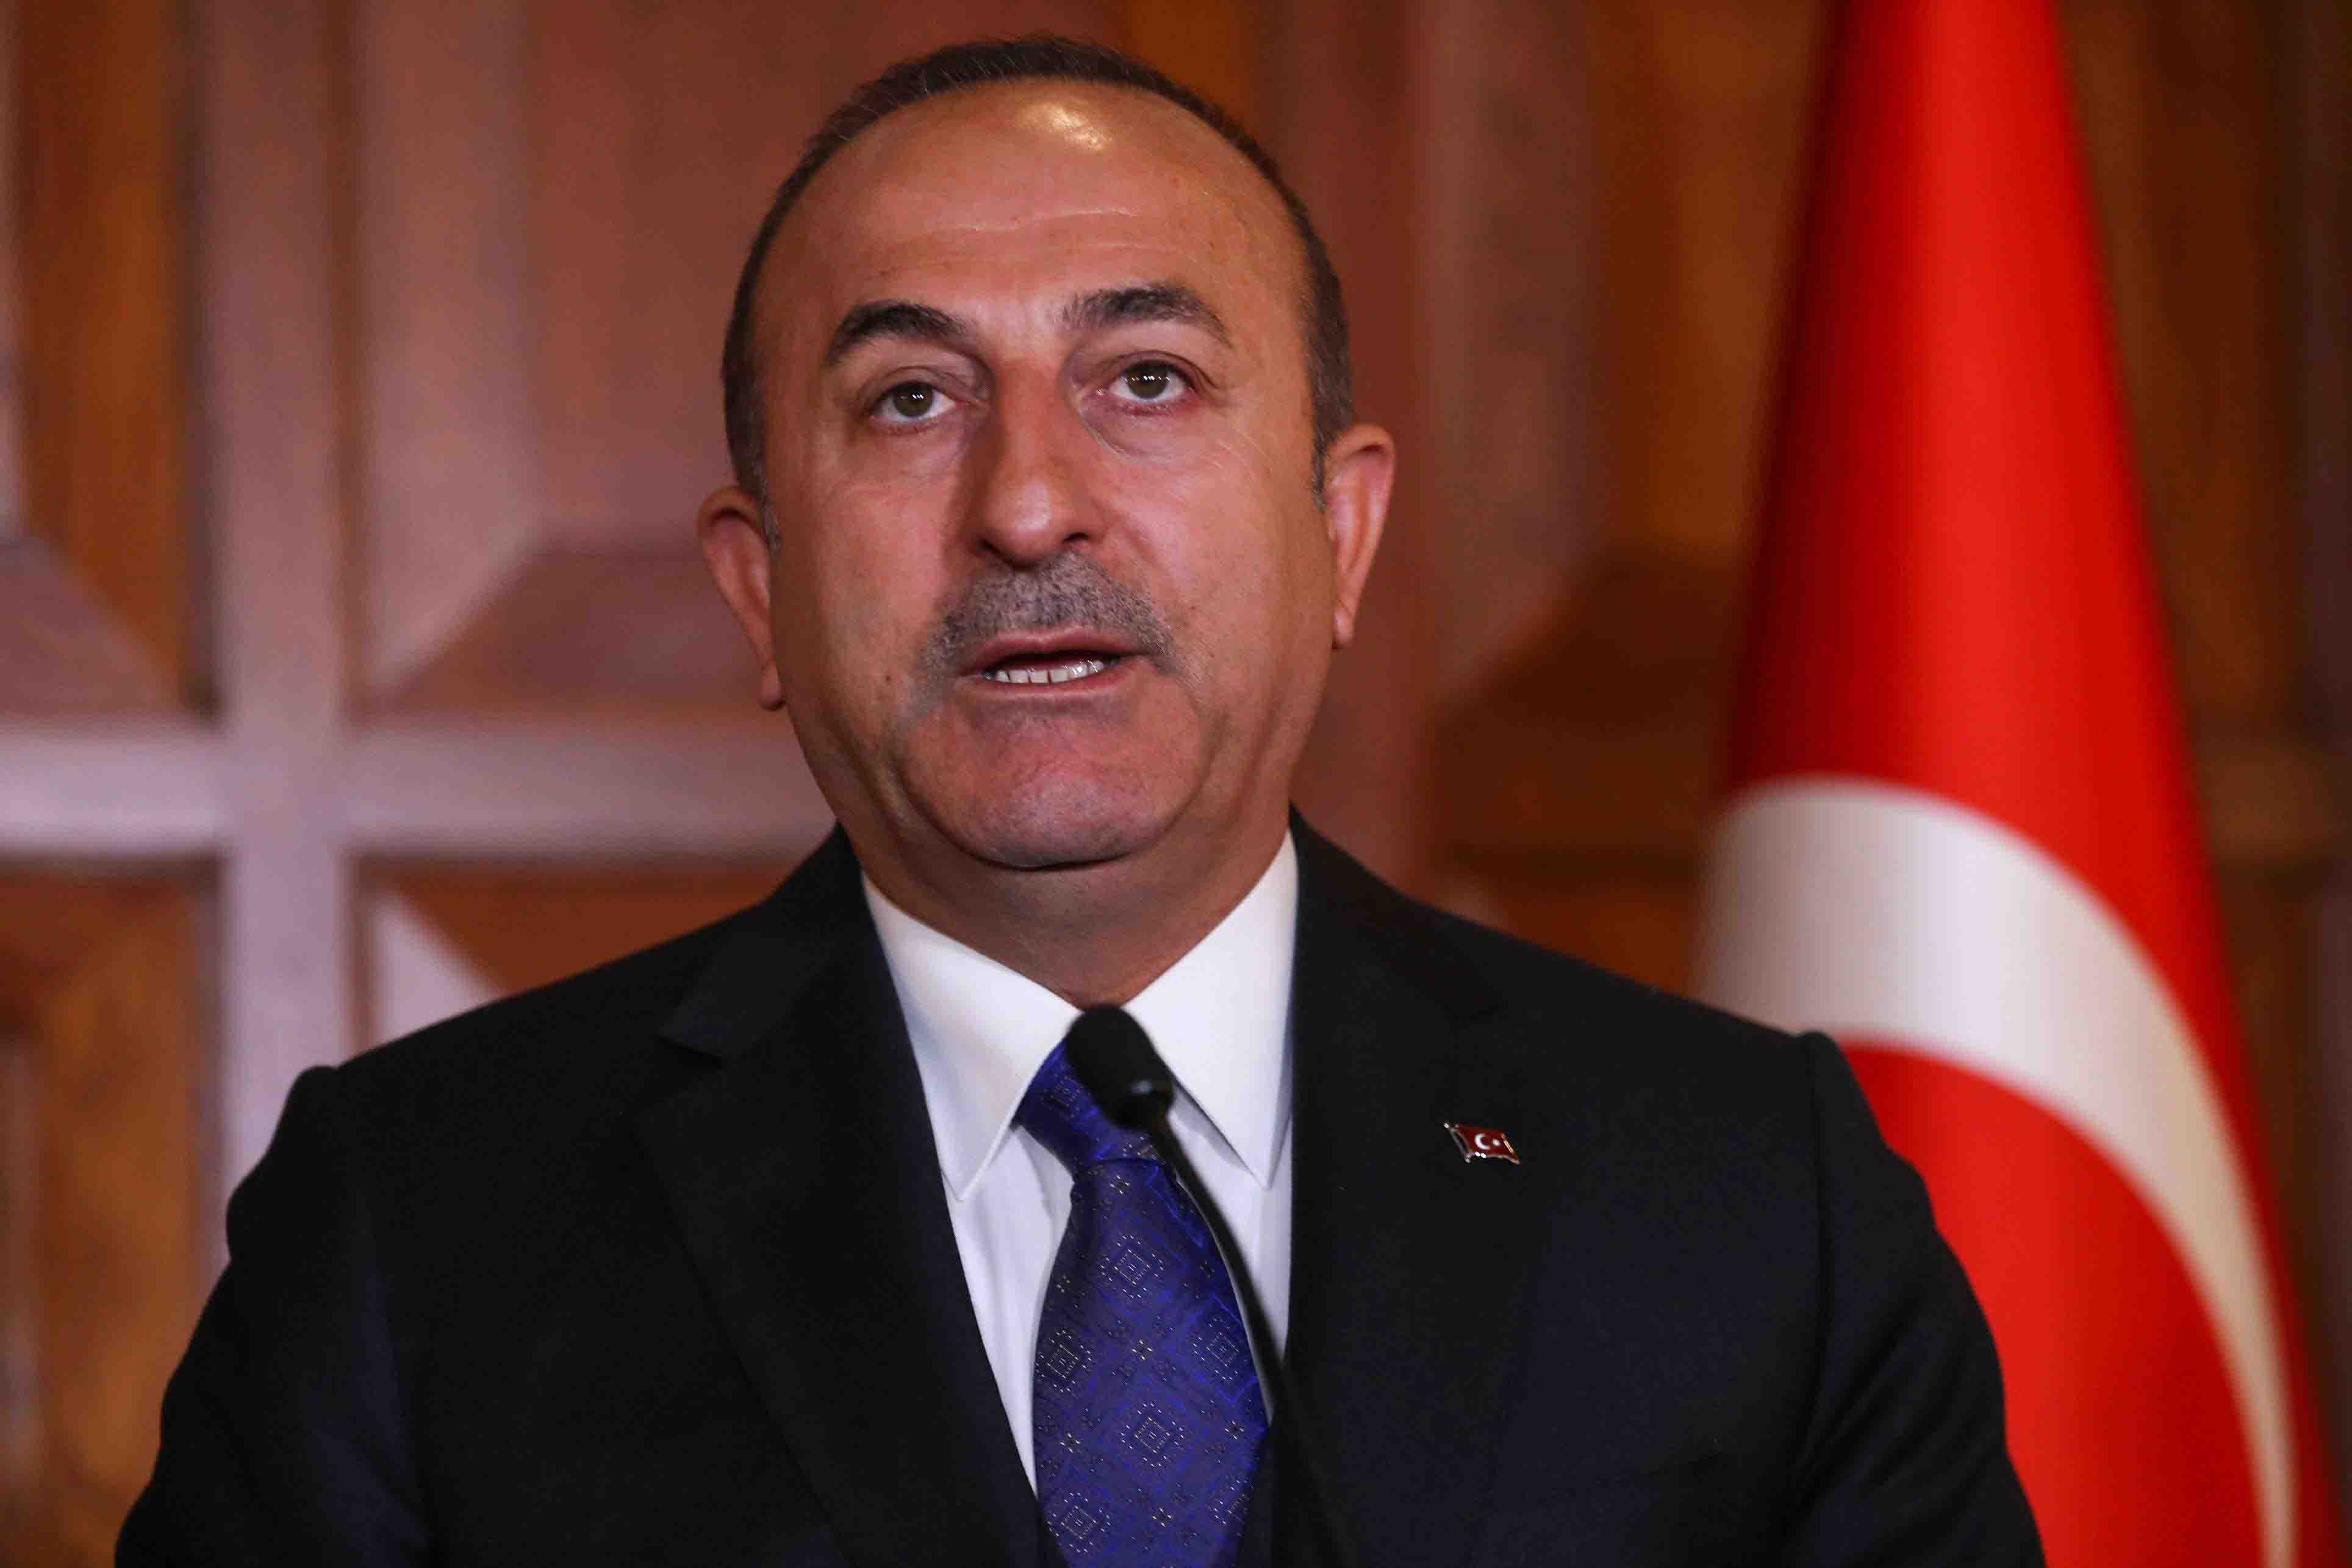 "We disagree with Russia on many issues," Cavusoglu said, pointing to Moscow's "aggression" in the Black Sea